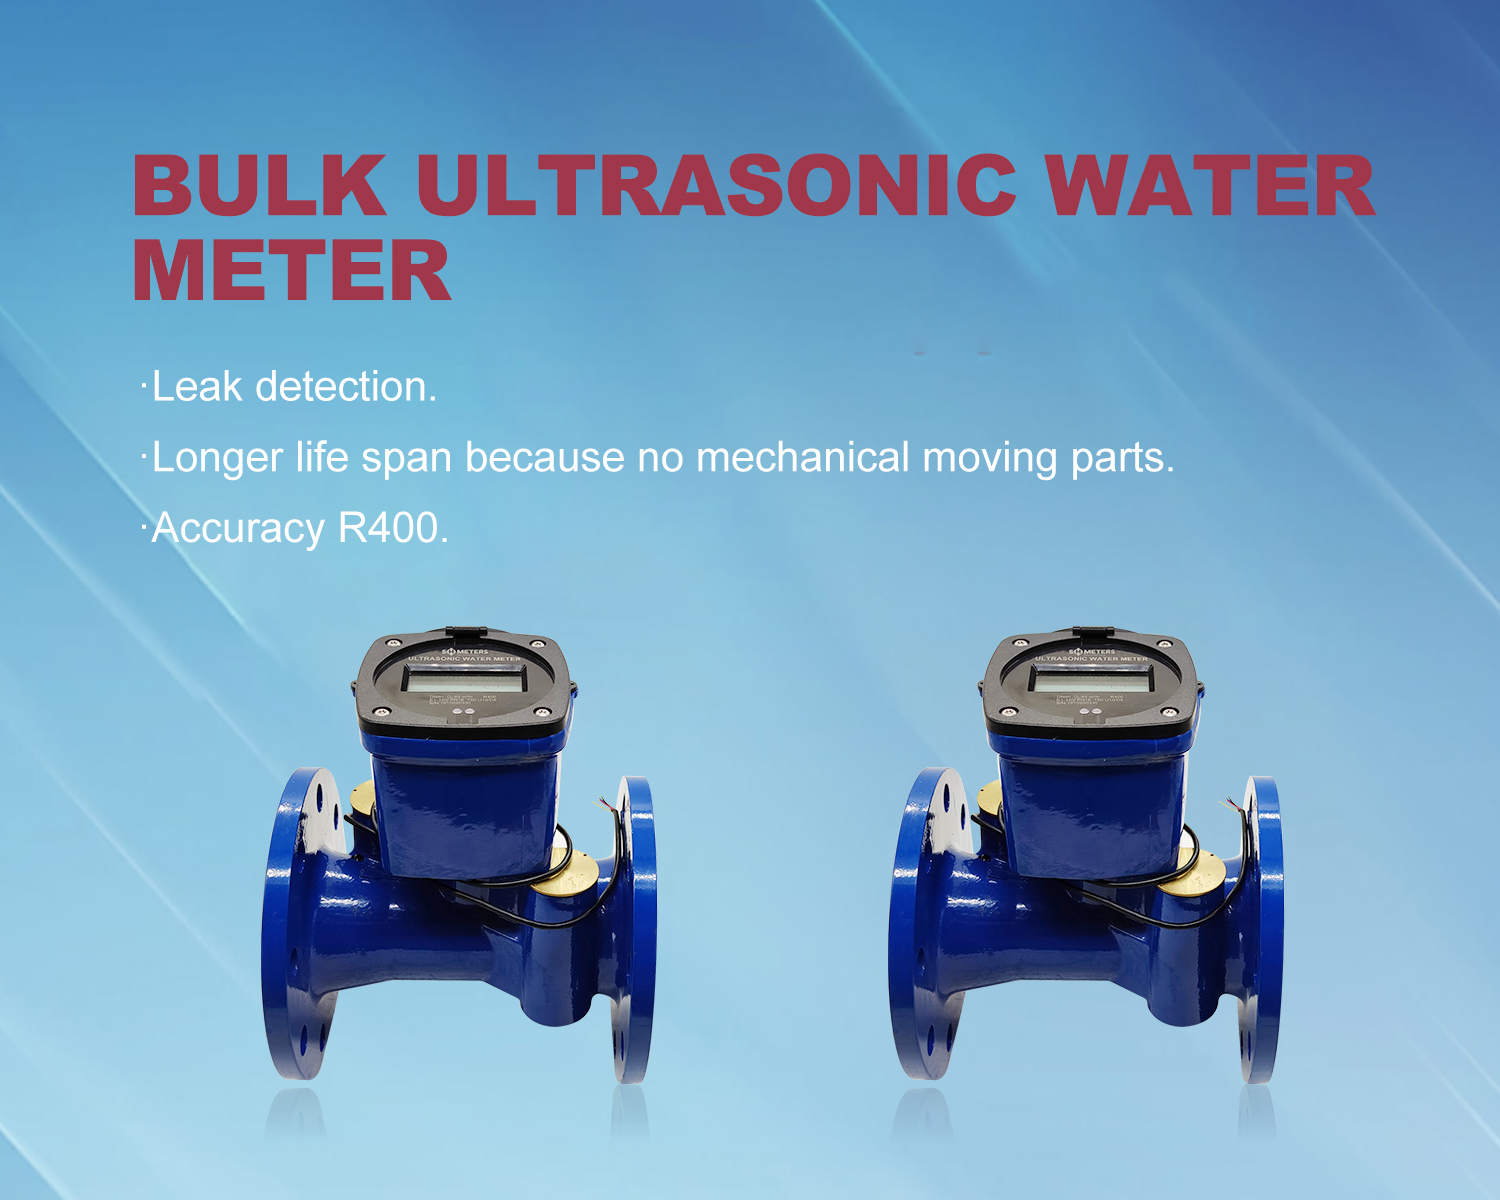 Why is bulk ultrasonic water meter suitable for agricultural irrigation？